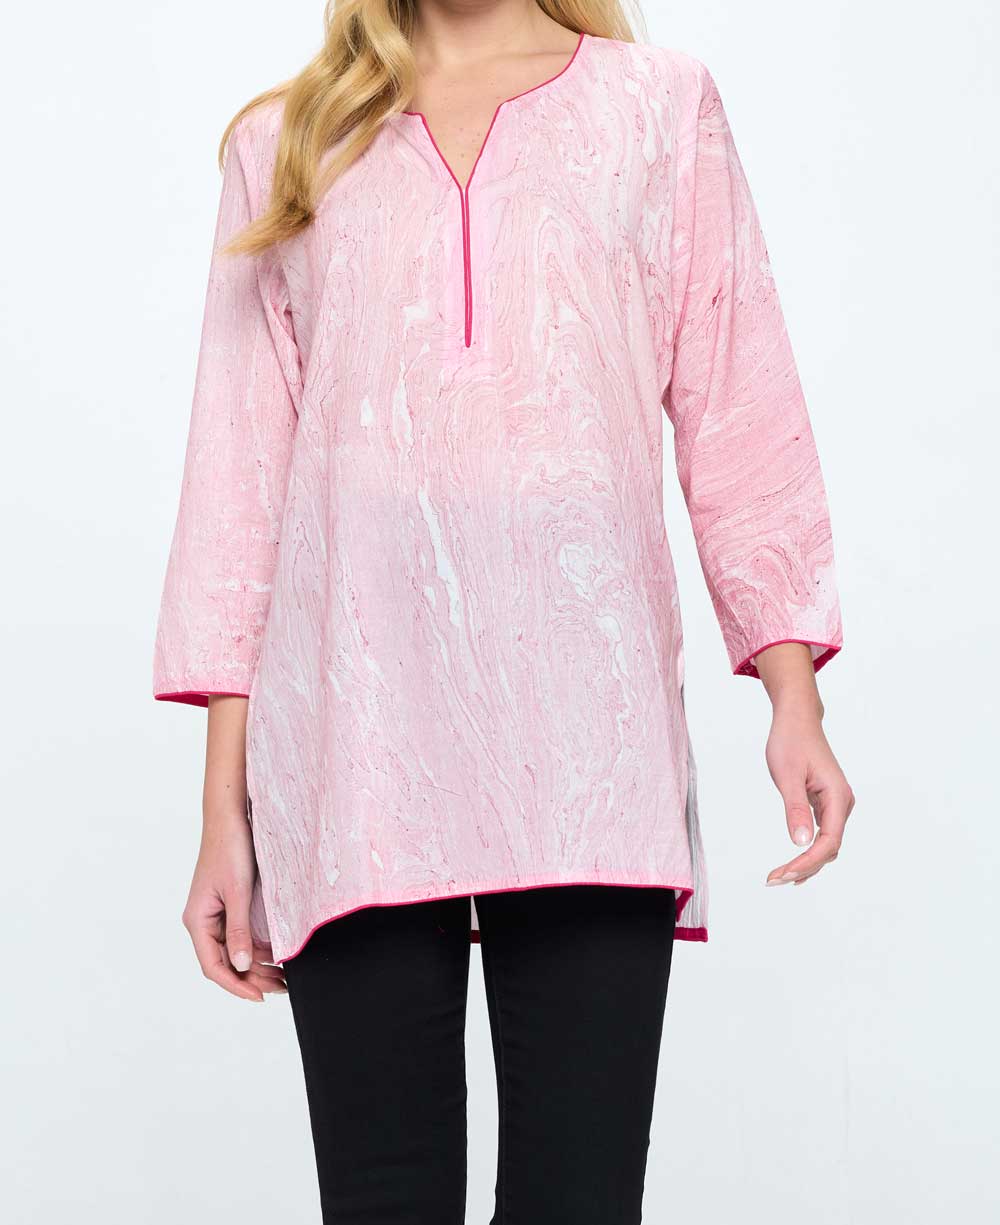 Pink Marble Print Soft Cotton Tunic Top - Shirts & Tops S